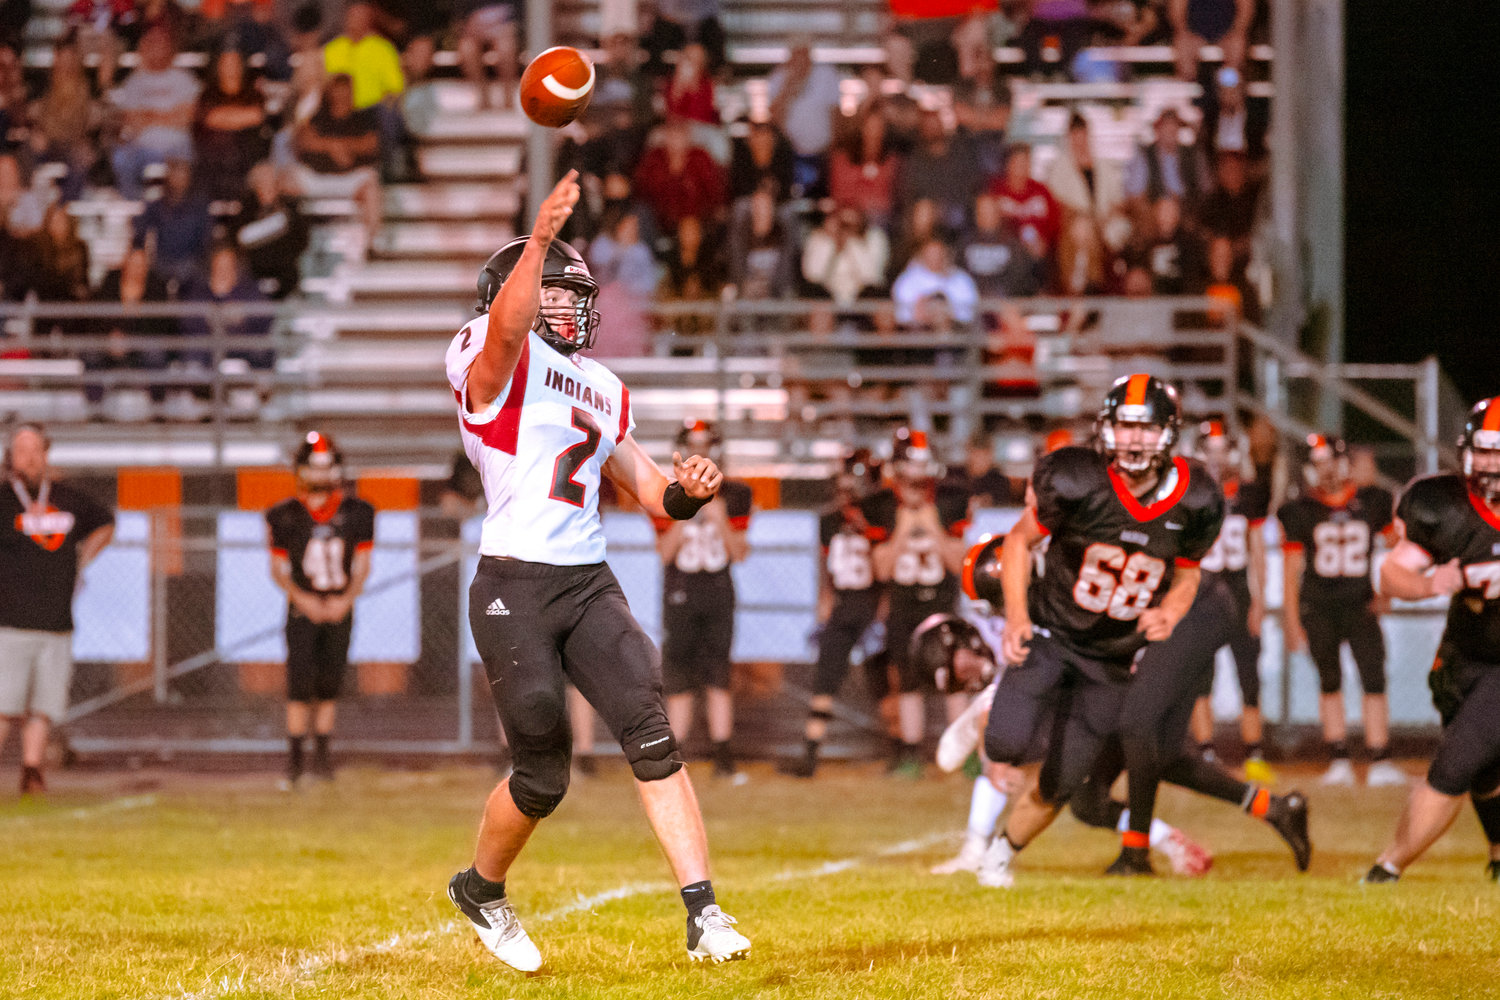 Toledo’s Wyatt Nef (2) completes a pass during a game against the Mountaineers Friday night at Rainier High School.